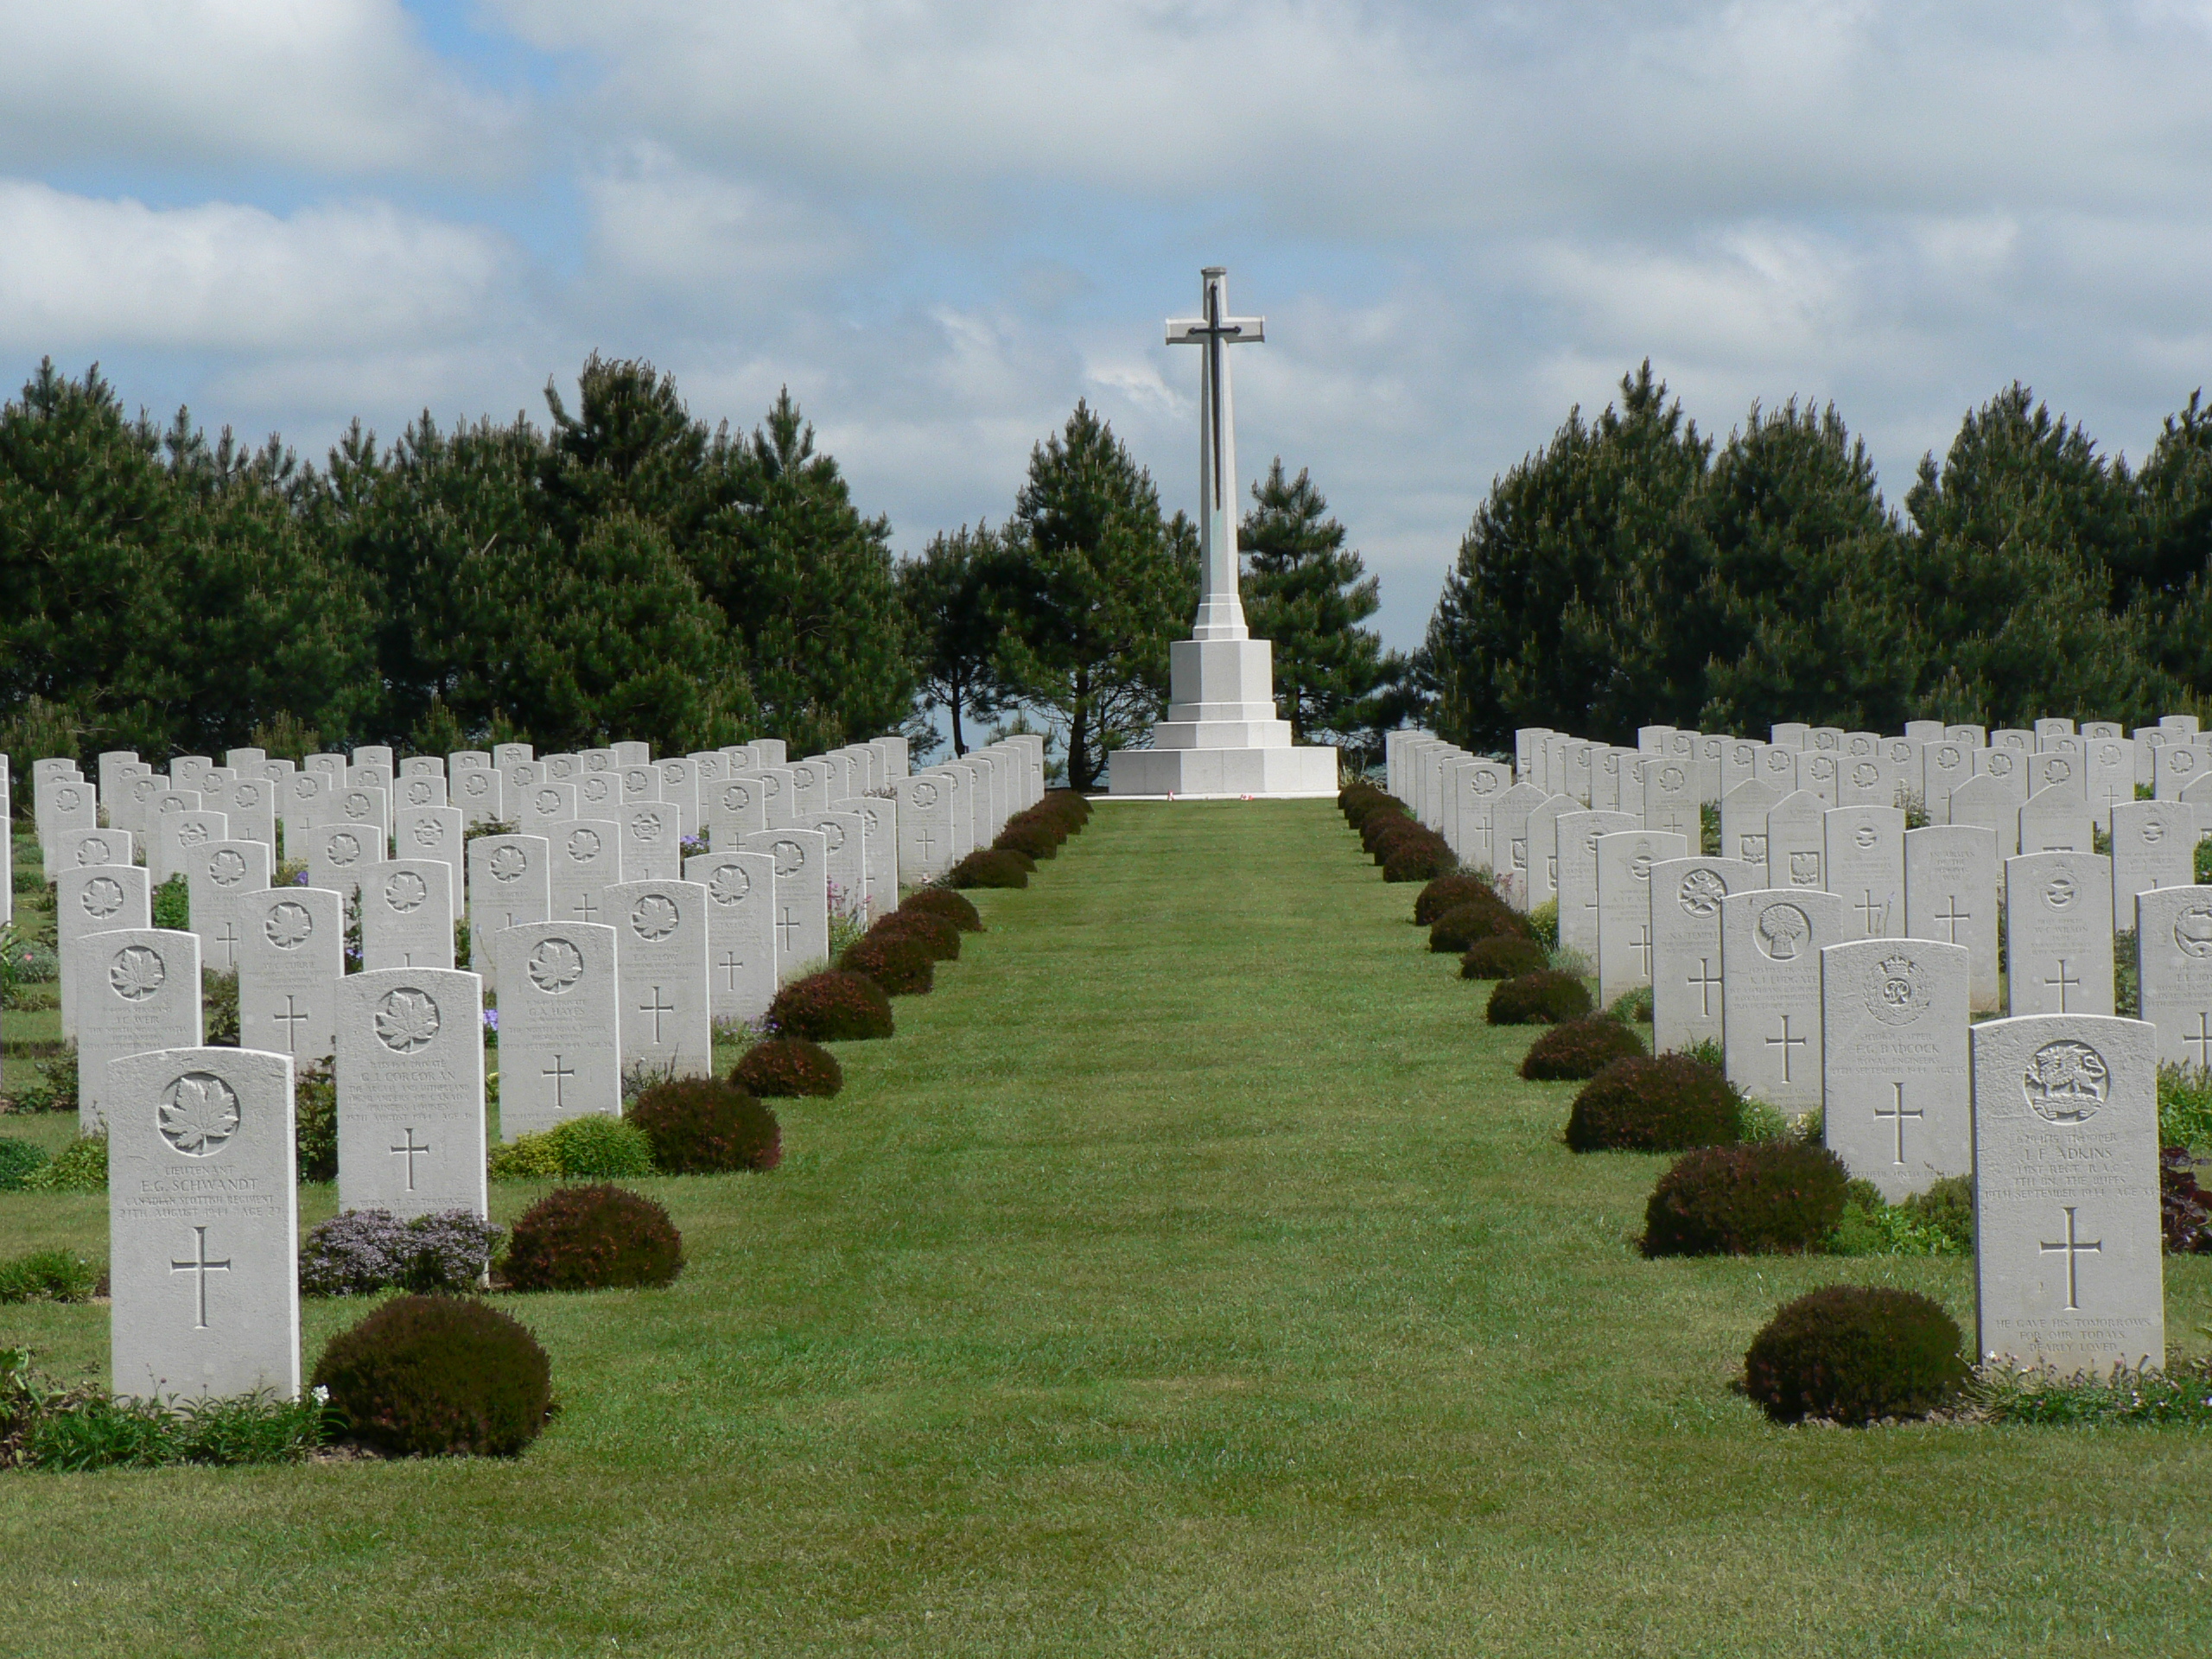 The Canadian cemetery